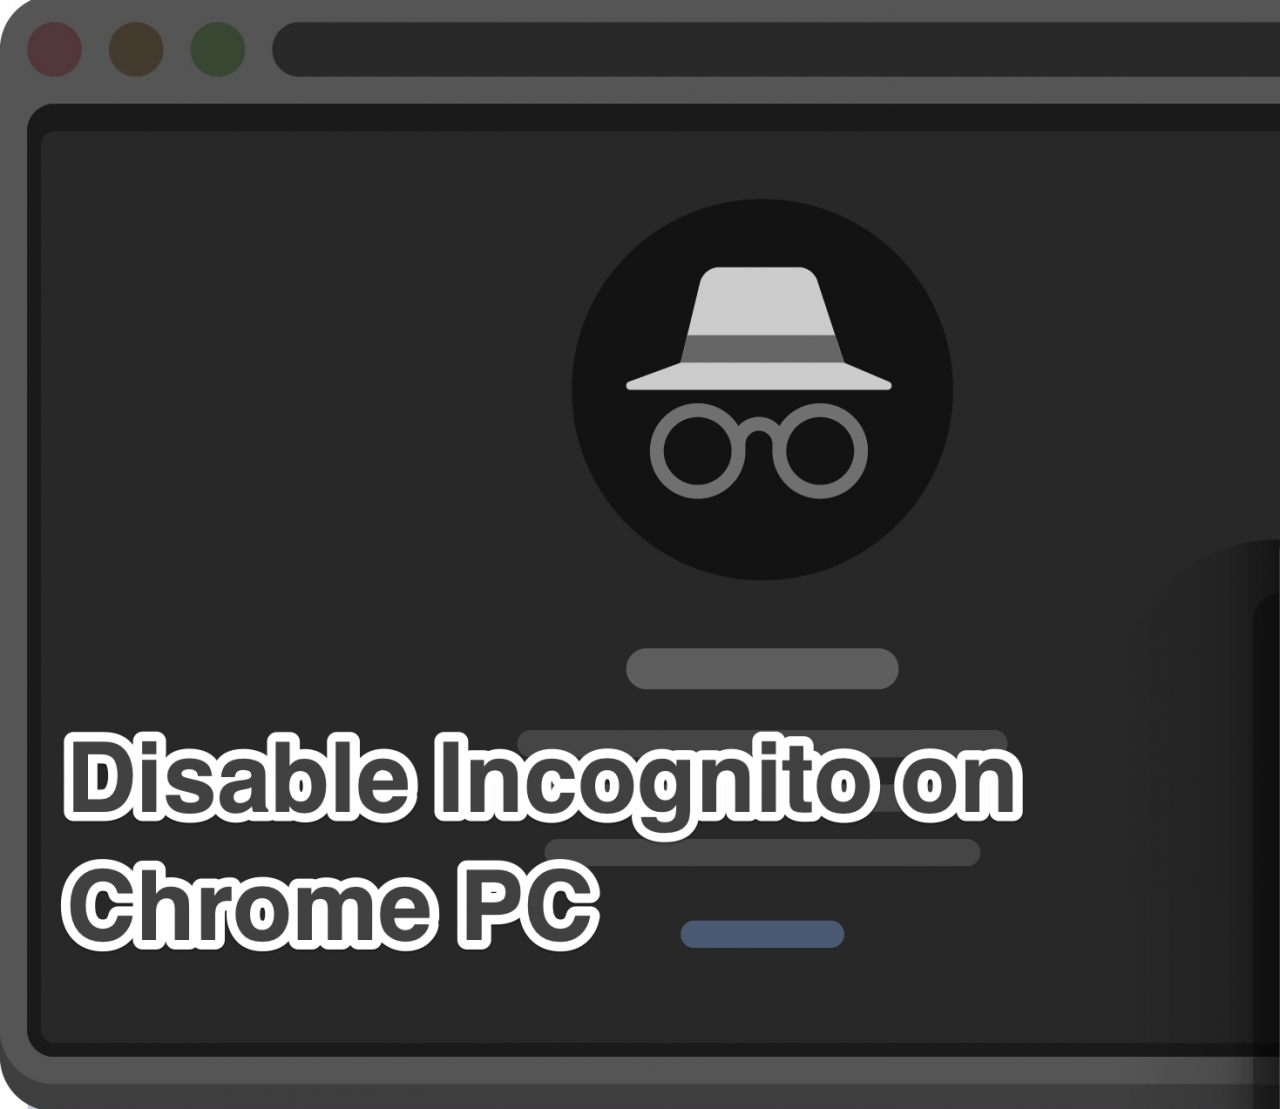 what does google chrome incognito do